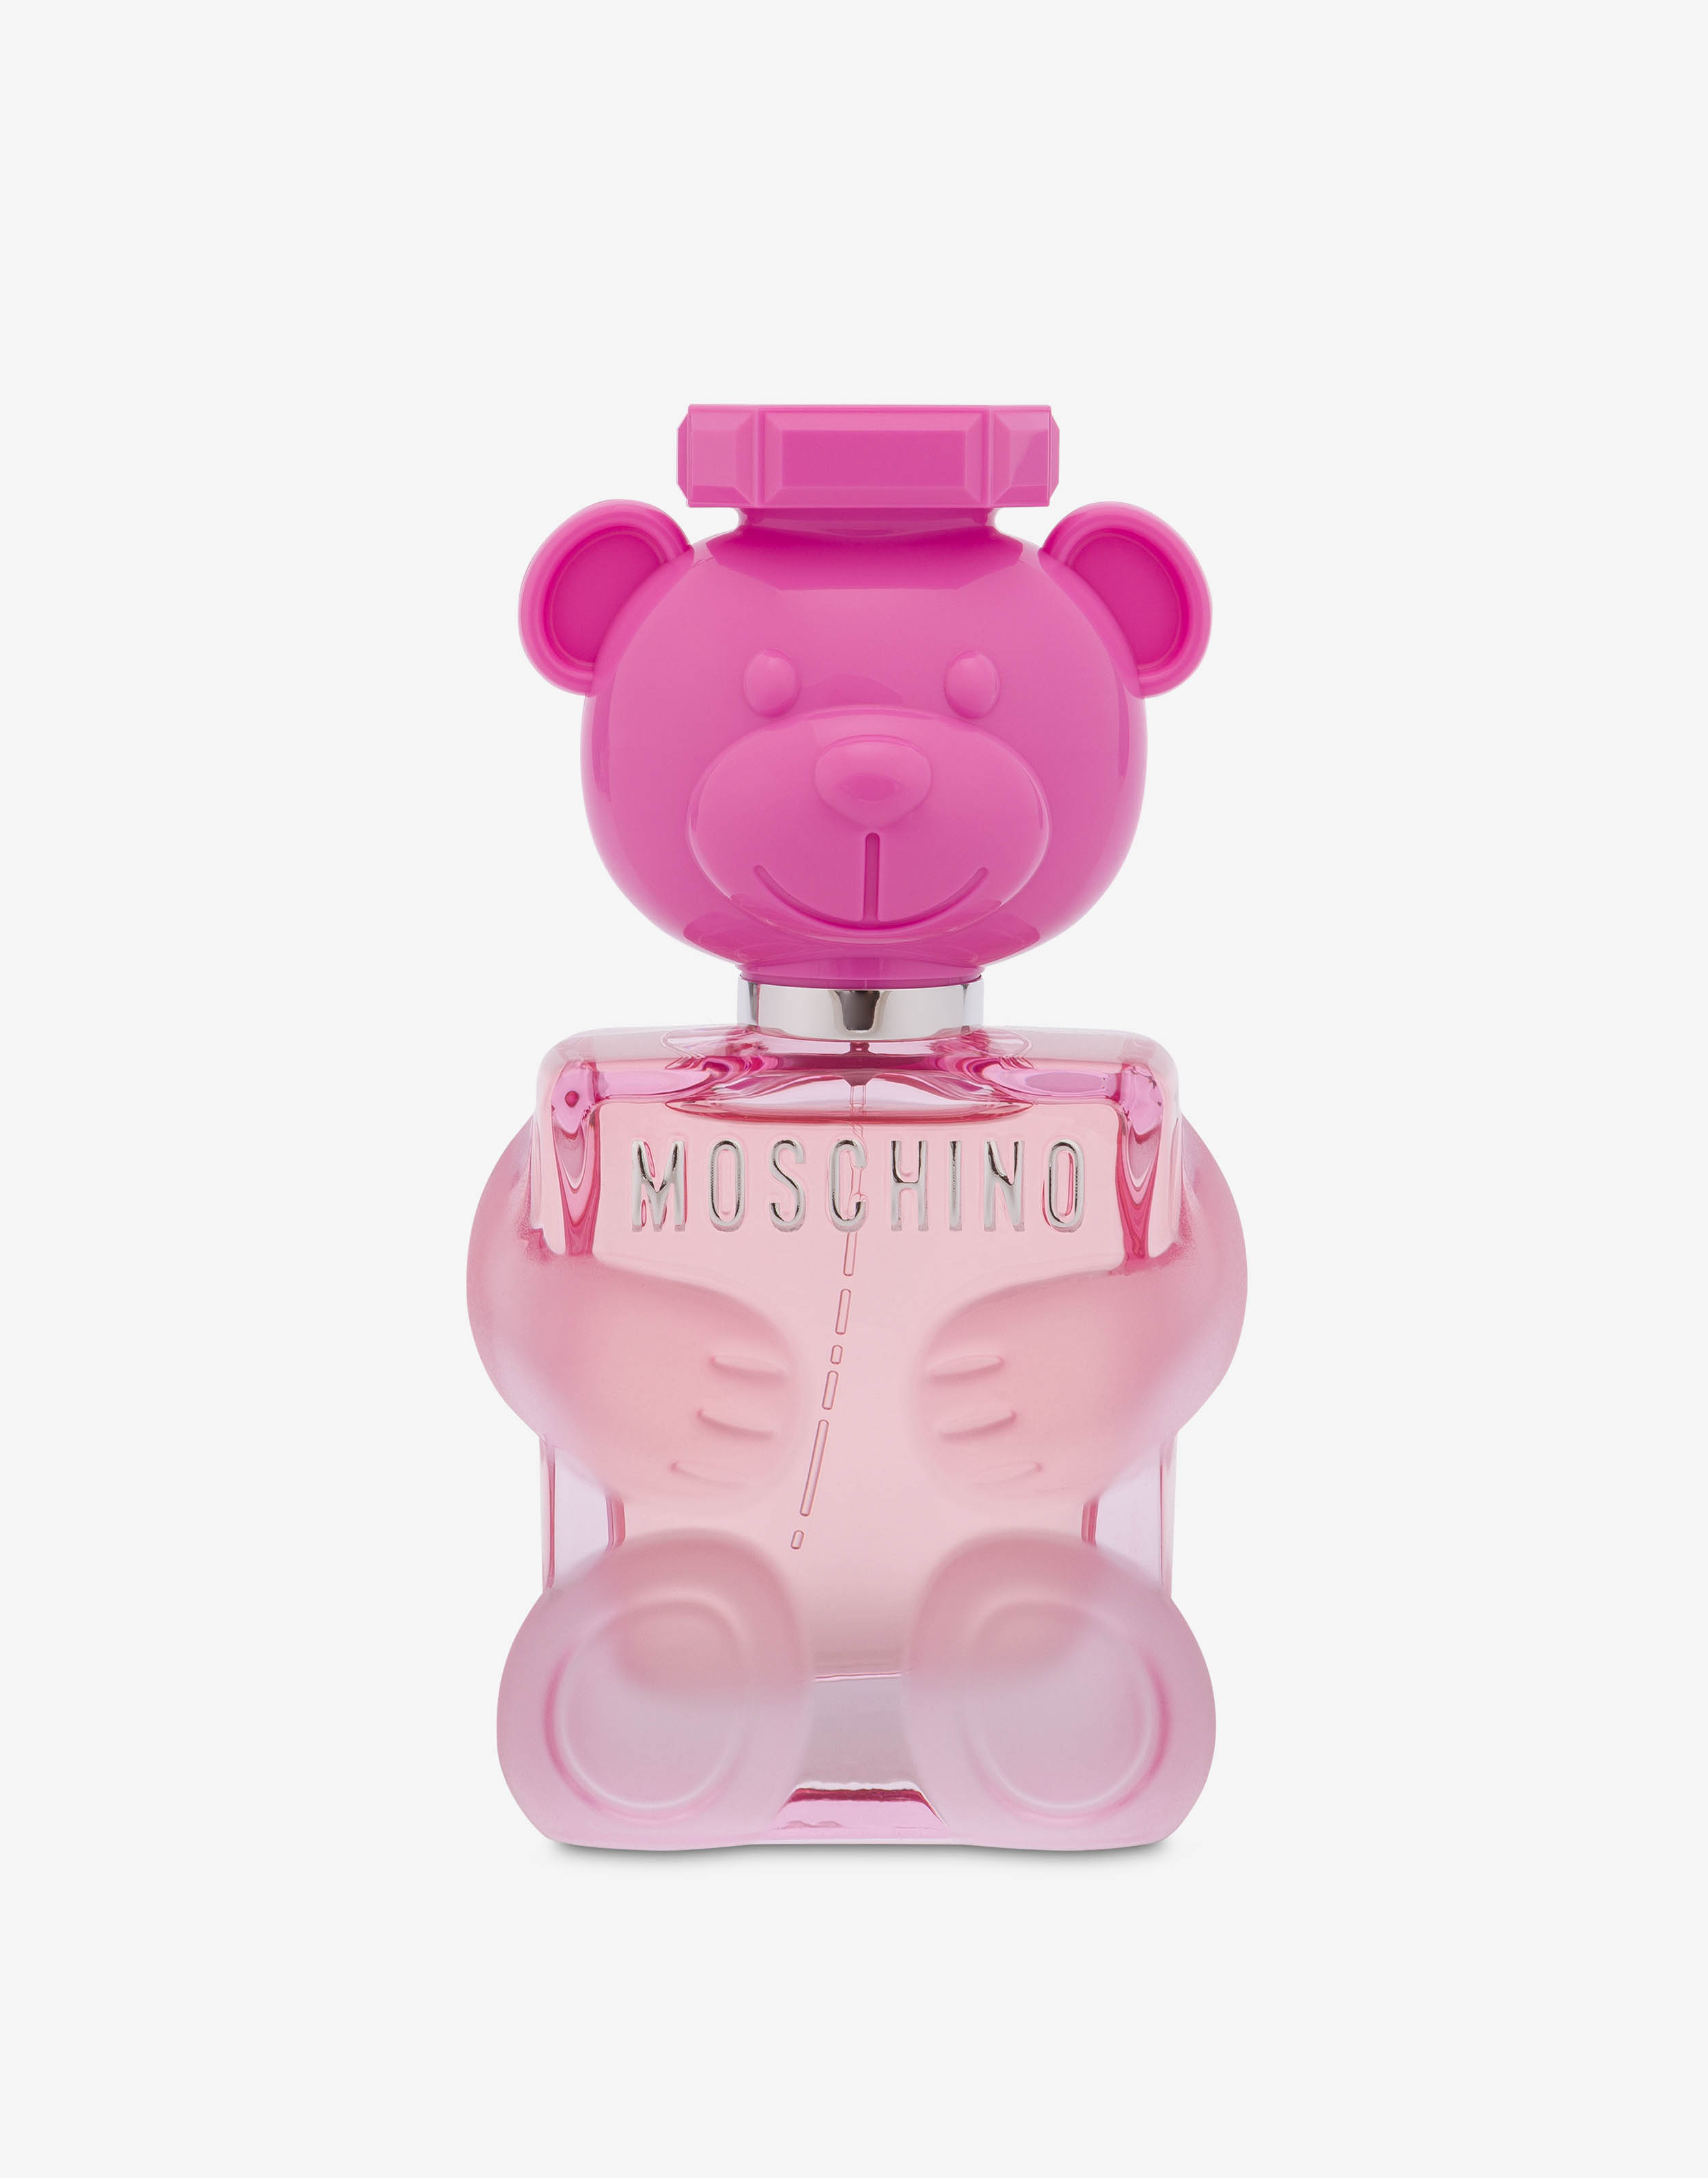 Jeremy Scott's New Moschino Fragrance Is Not a Toy